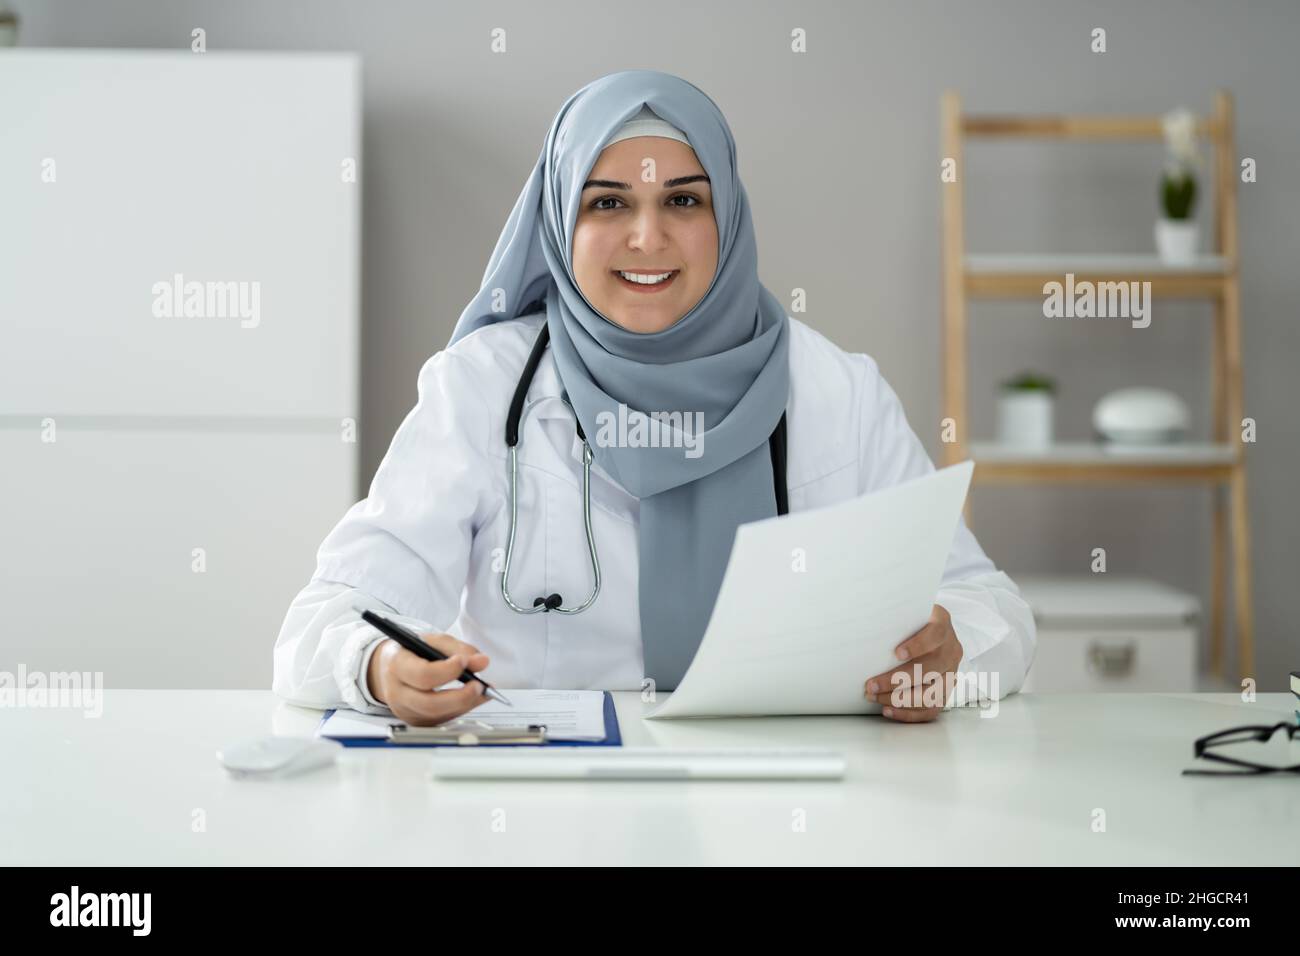 Muslim Woman Physician Doctor Video Conference Call Stock Photo